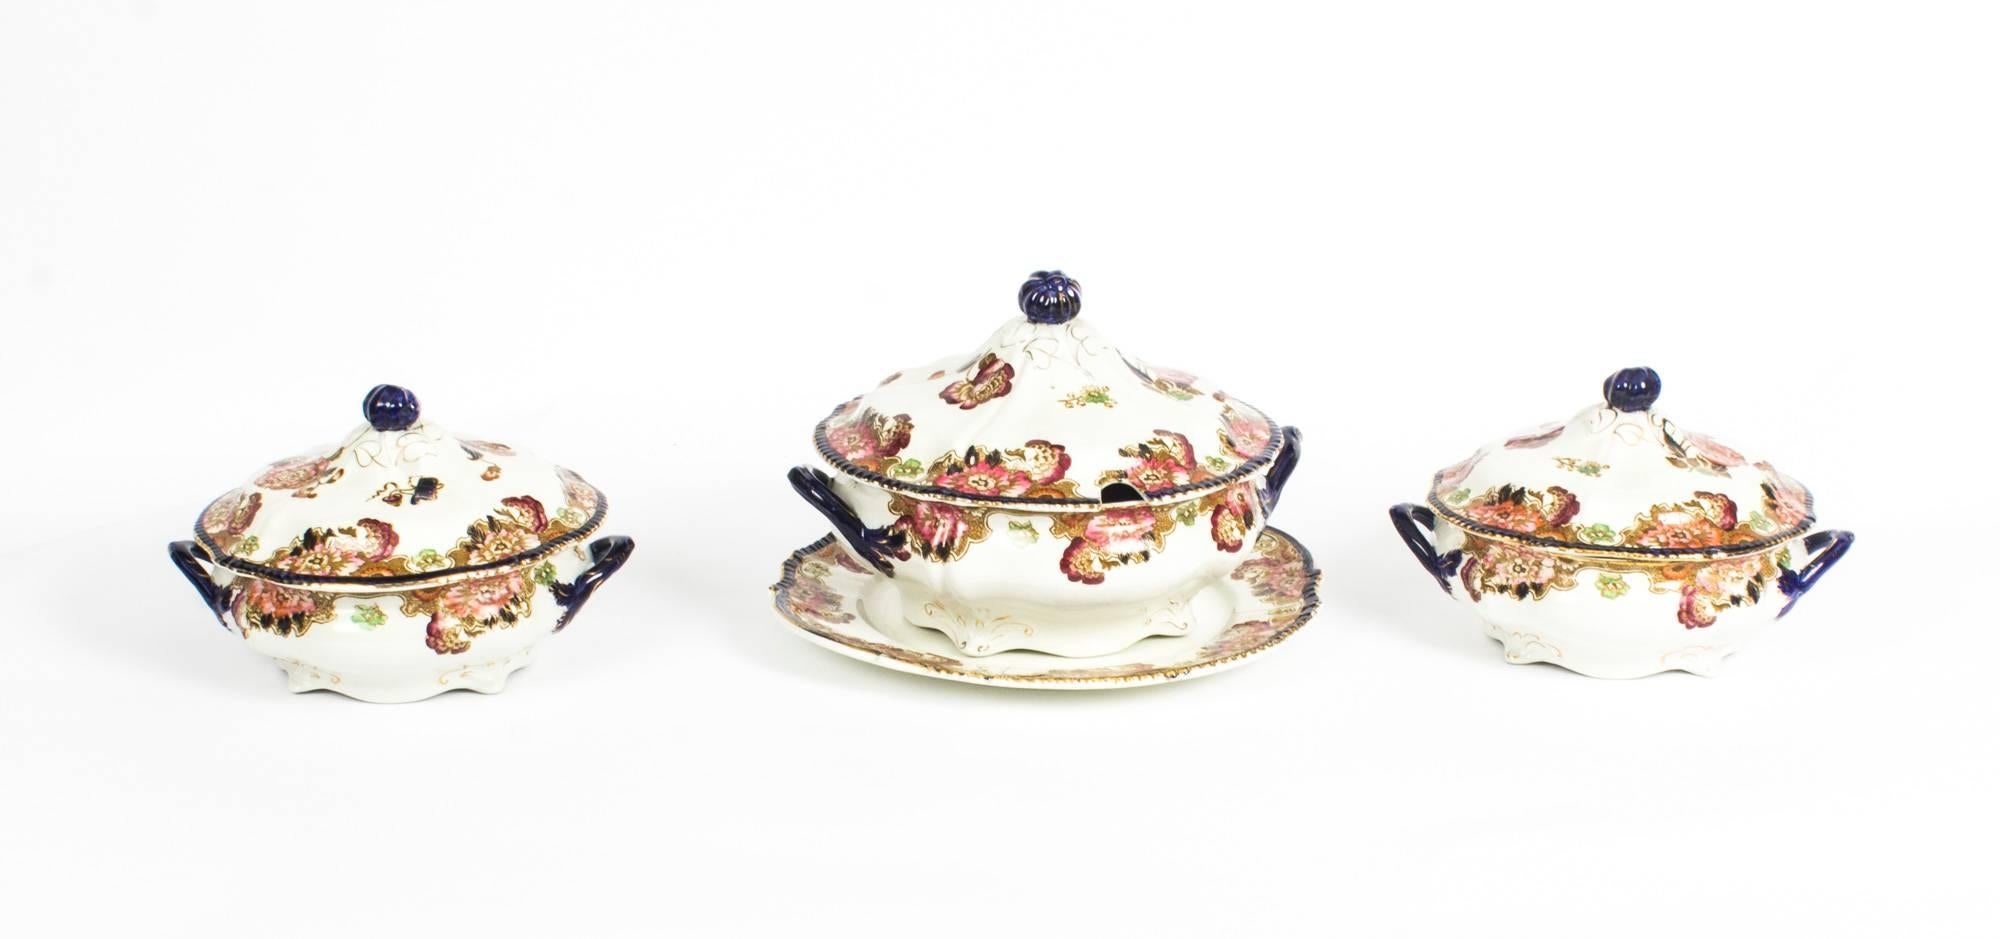 An boldly decorated 64 piece Cambridge Pattern part dinner service by Wood & Sons, circa 1865 in date.

The vibrant Cambridge pattern depicting both flowers and patterns, printed in underglaze ochre with hand painted cobalt edges, maroon, pink